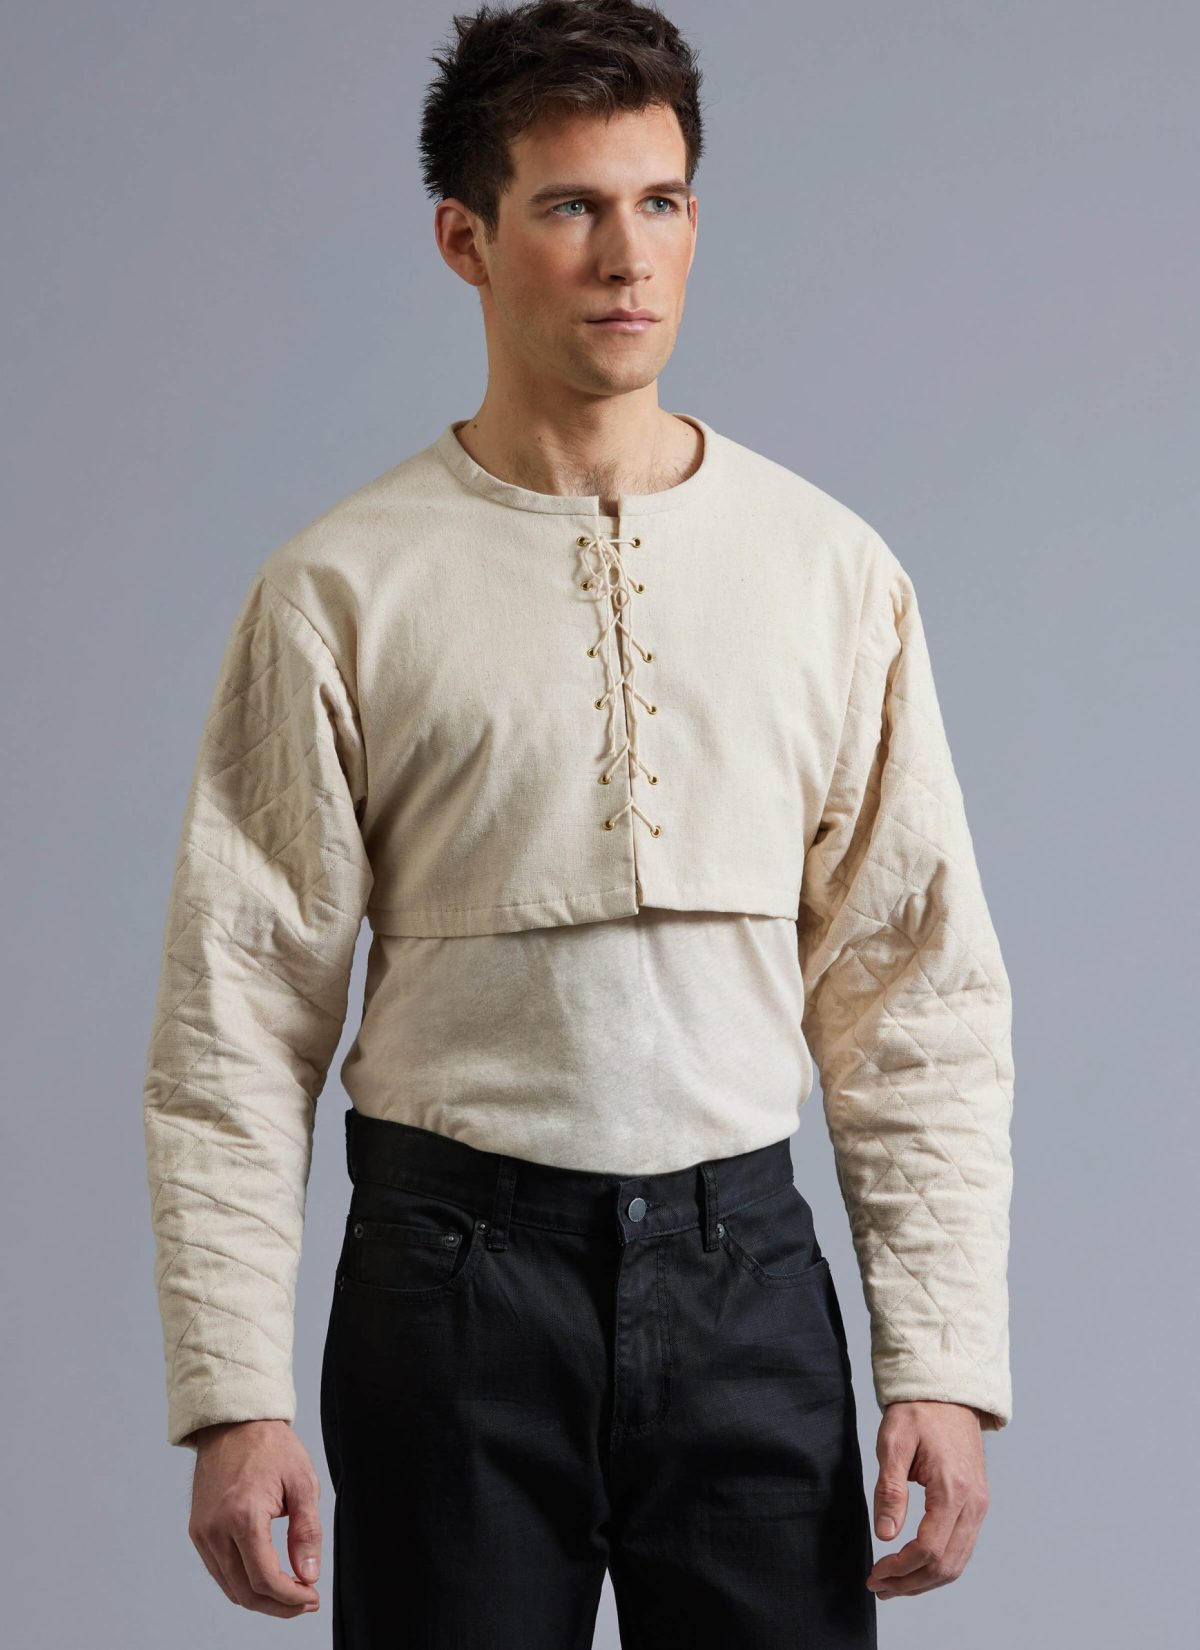 McCall's Sewing Pattern M8423 Men's Costume